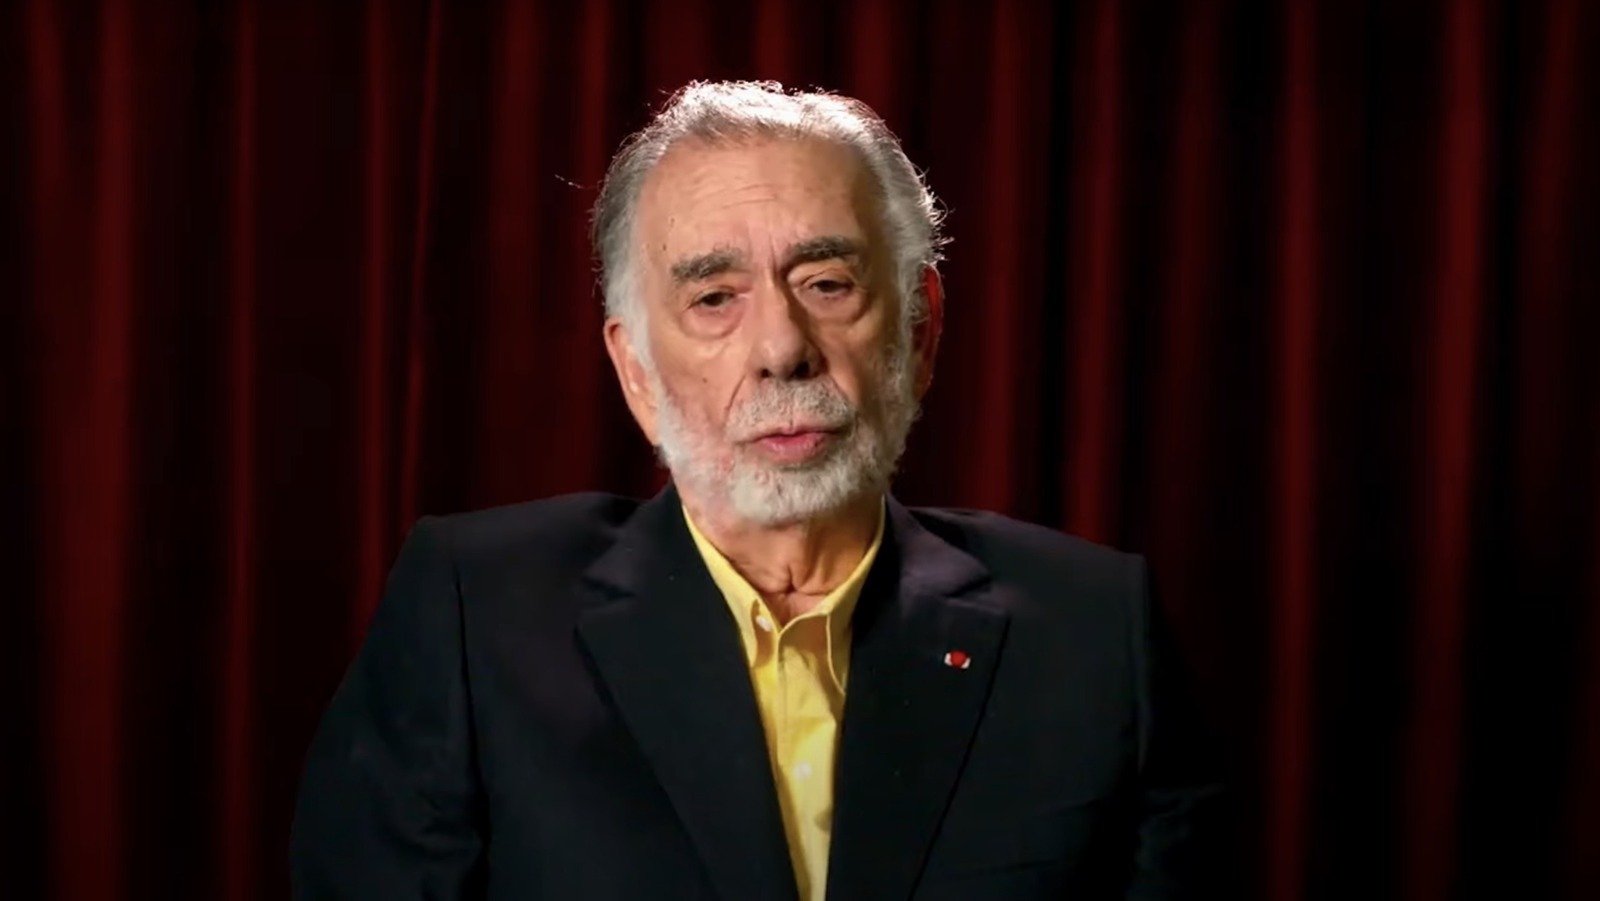 Francis Ford Coppola Still Wants To Make Megalopolis, Says He'll Fund The $100 Million Budget Himself - /Film